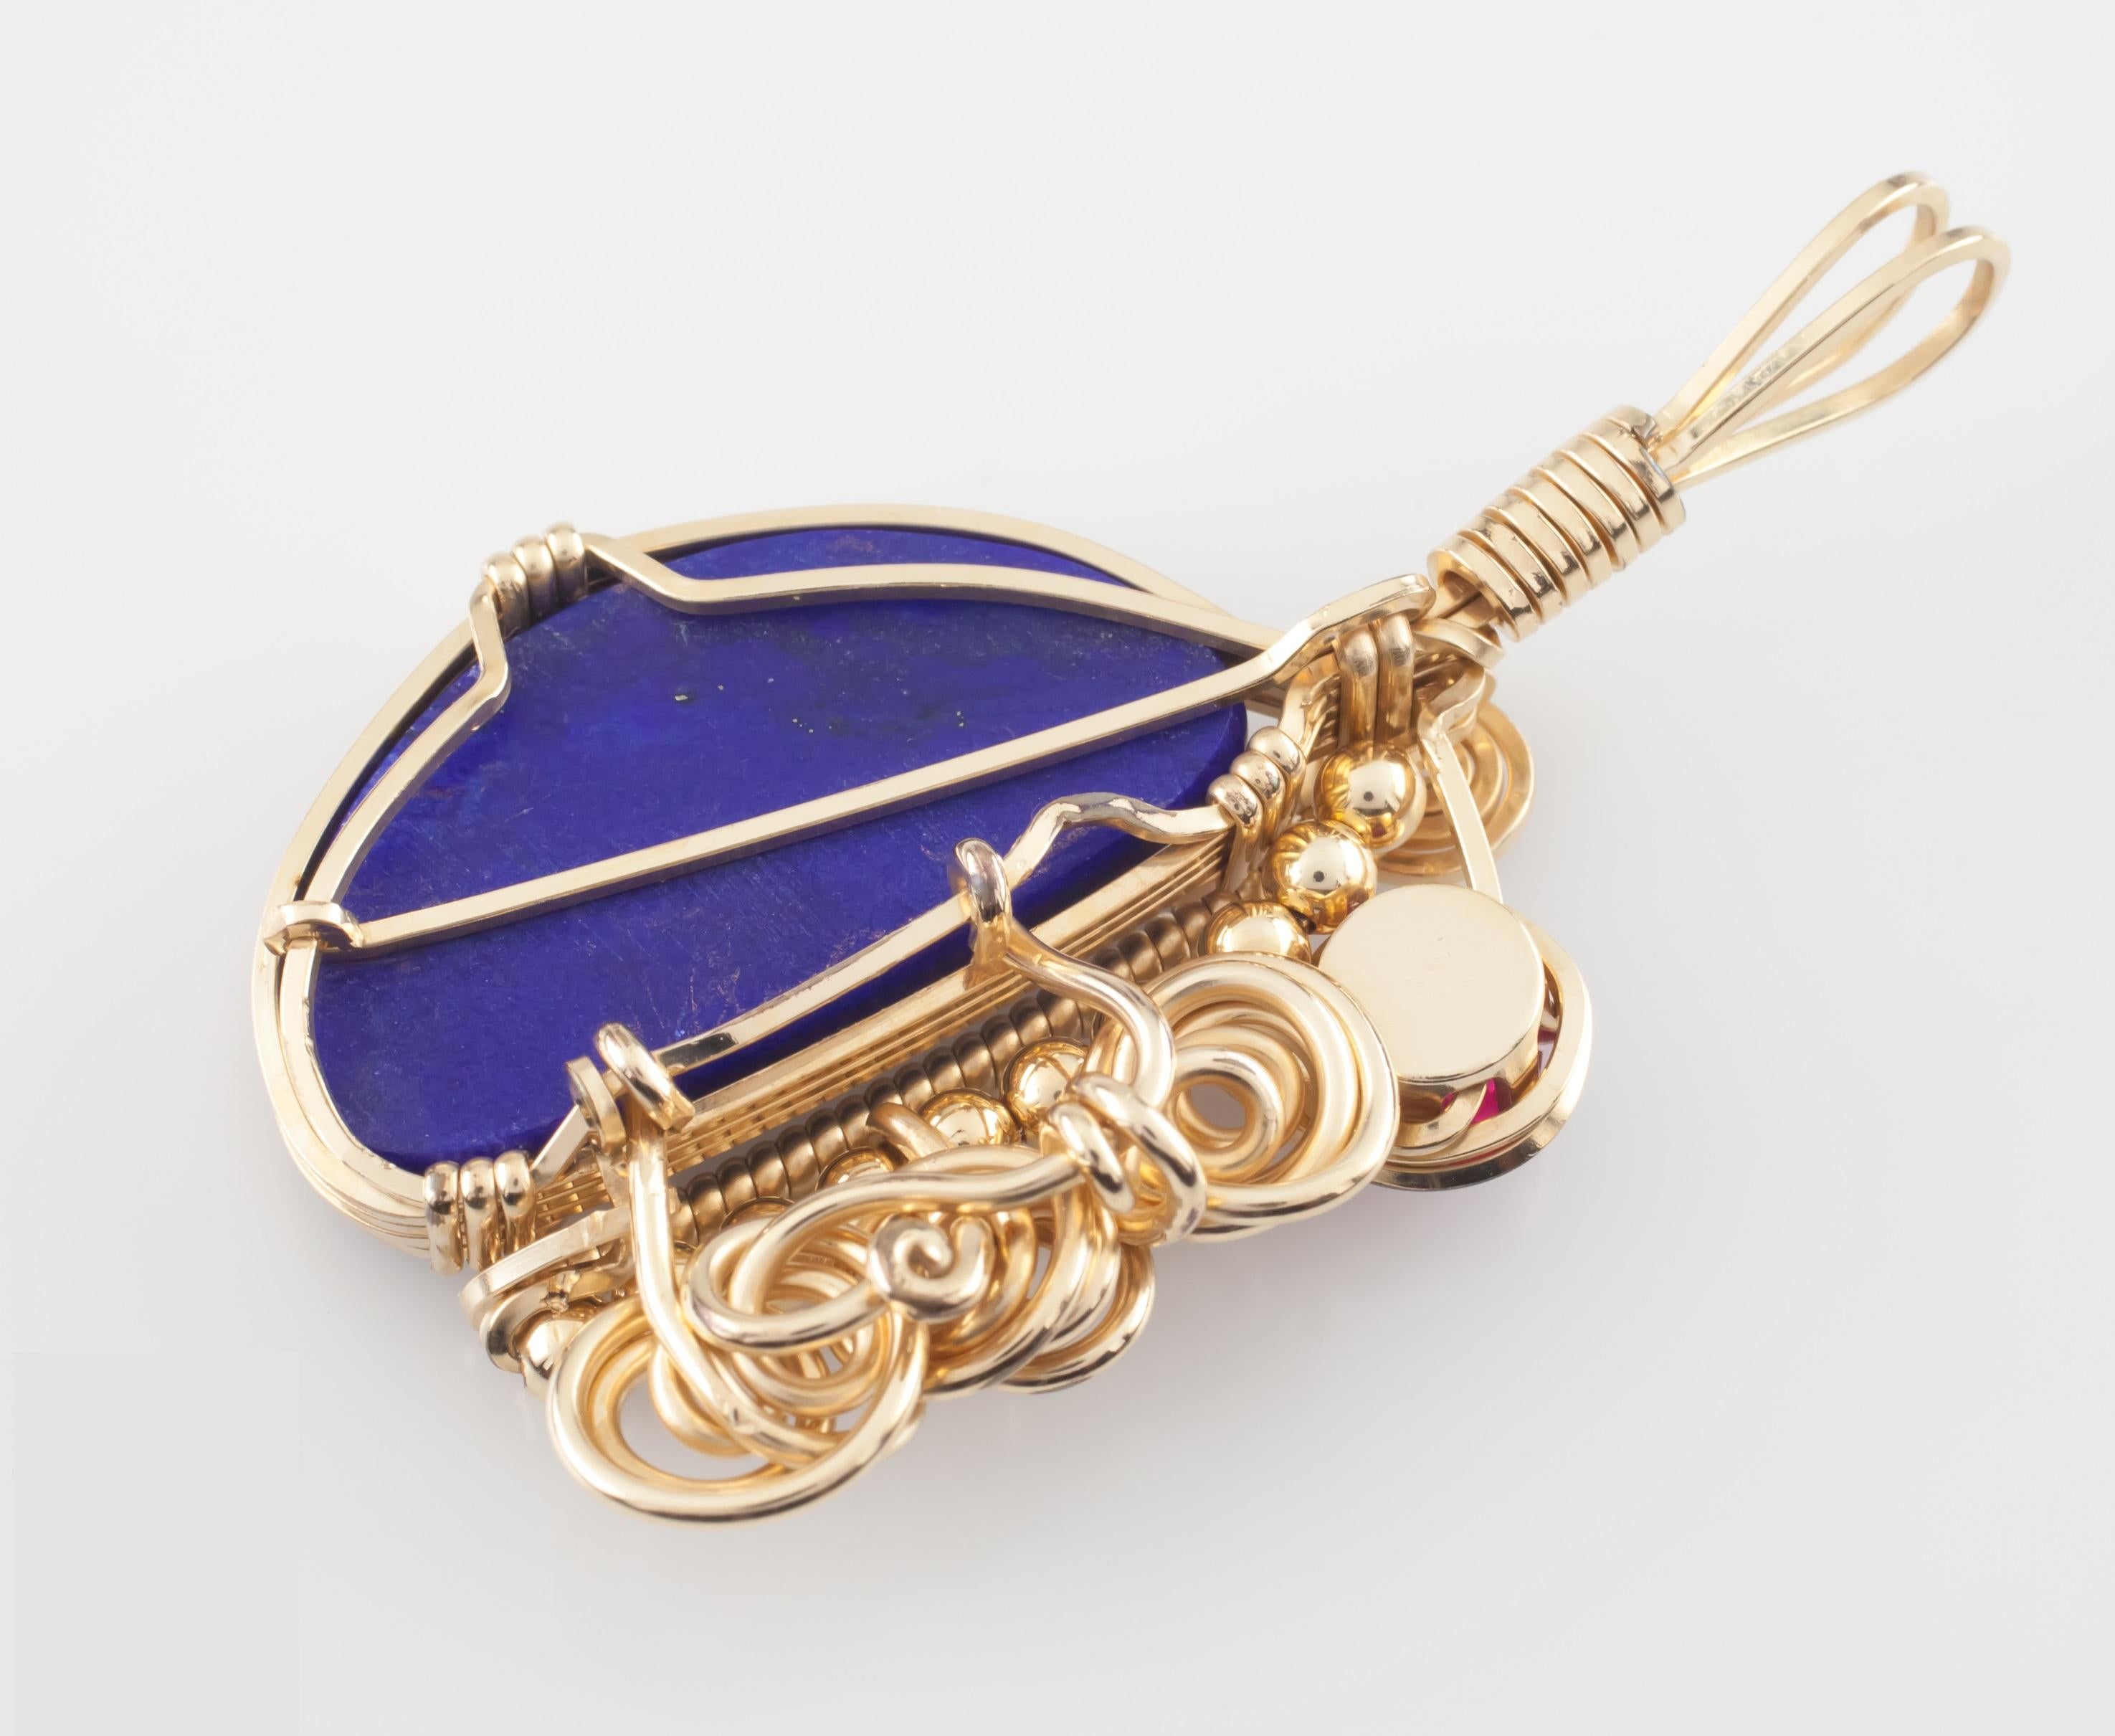 A Unique Handmade Goldfilled Lapis And Tourmaline Pendant
Features Bezel-Set Lapis Lazuli and Prong-Set Round Cut Pink Tourmaline with Accents of Coils of Gold-Filled Wire
27 mm Wide
50 mm Long (Including Bail)
Dimensions of Lapis = 27 mm x 15